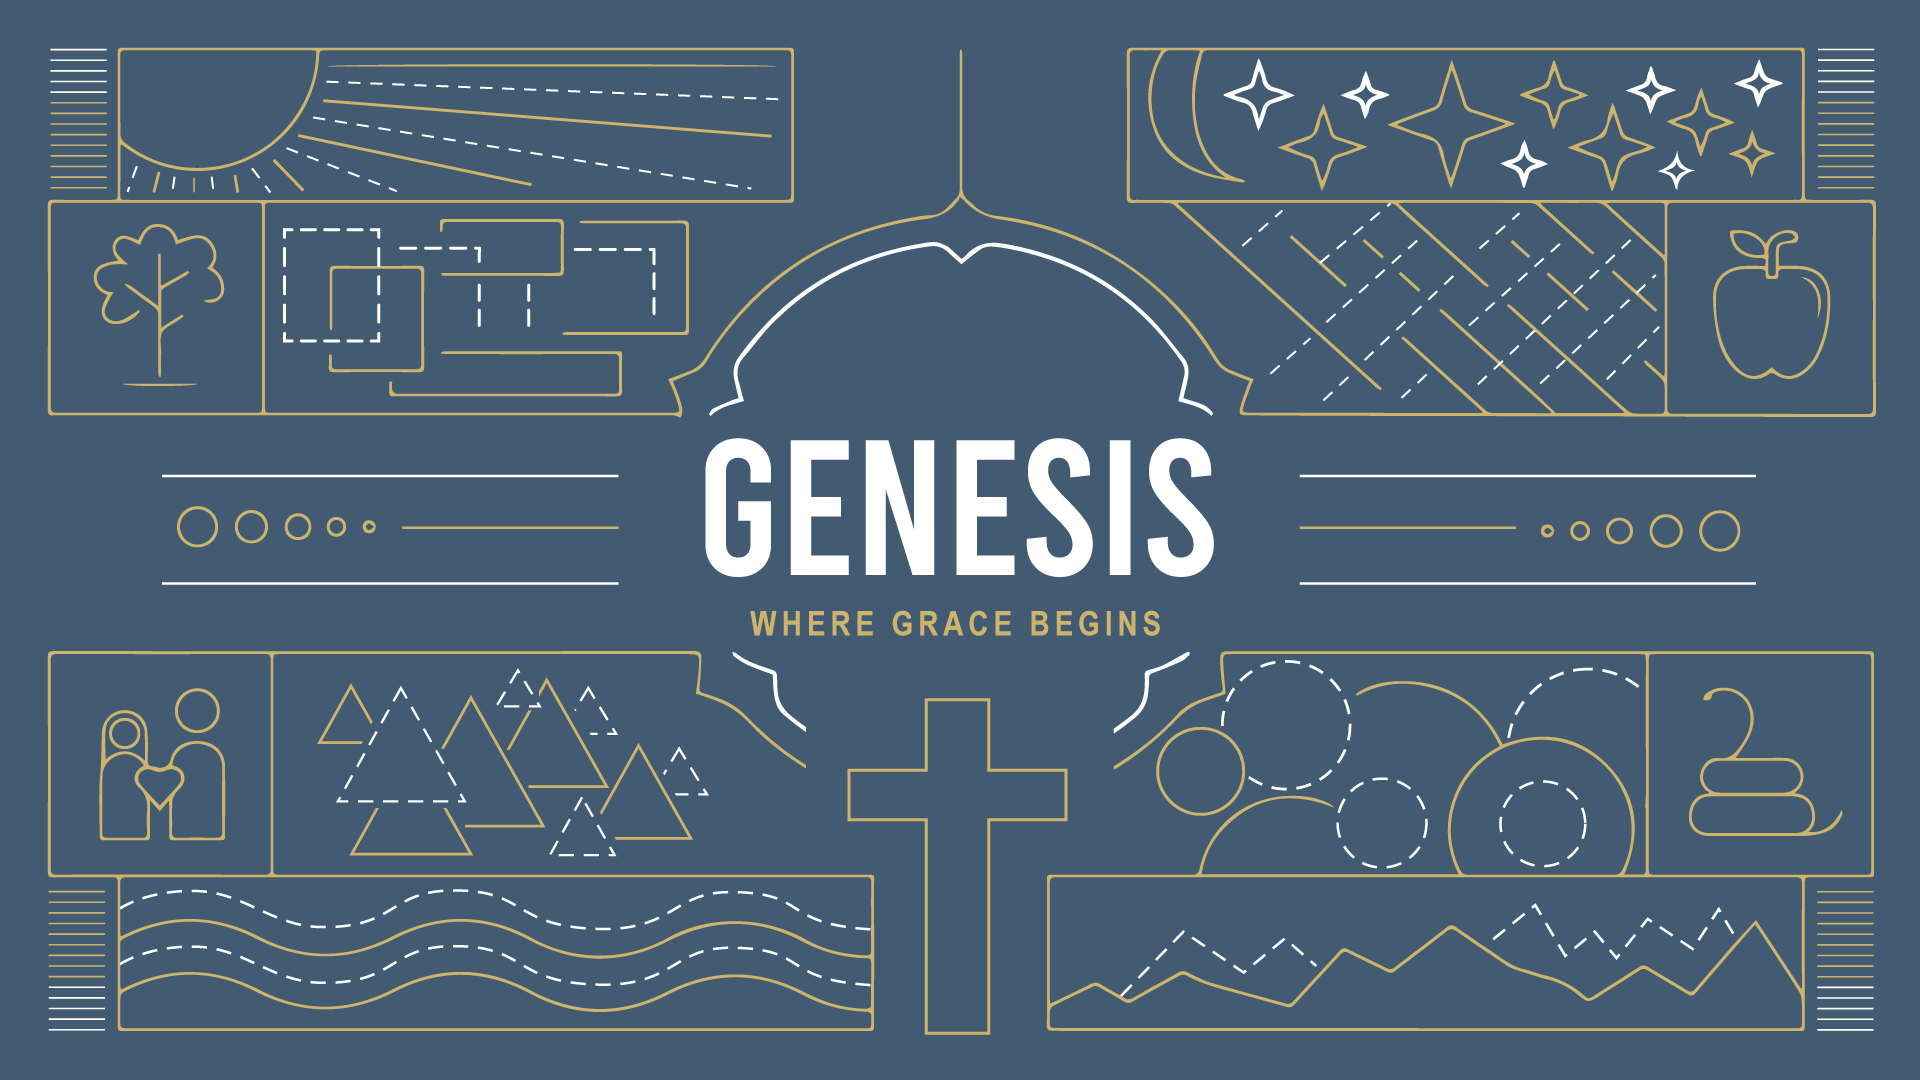 The Fate of the 12 Tribes - Genesis 49:1-27